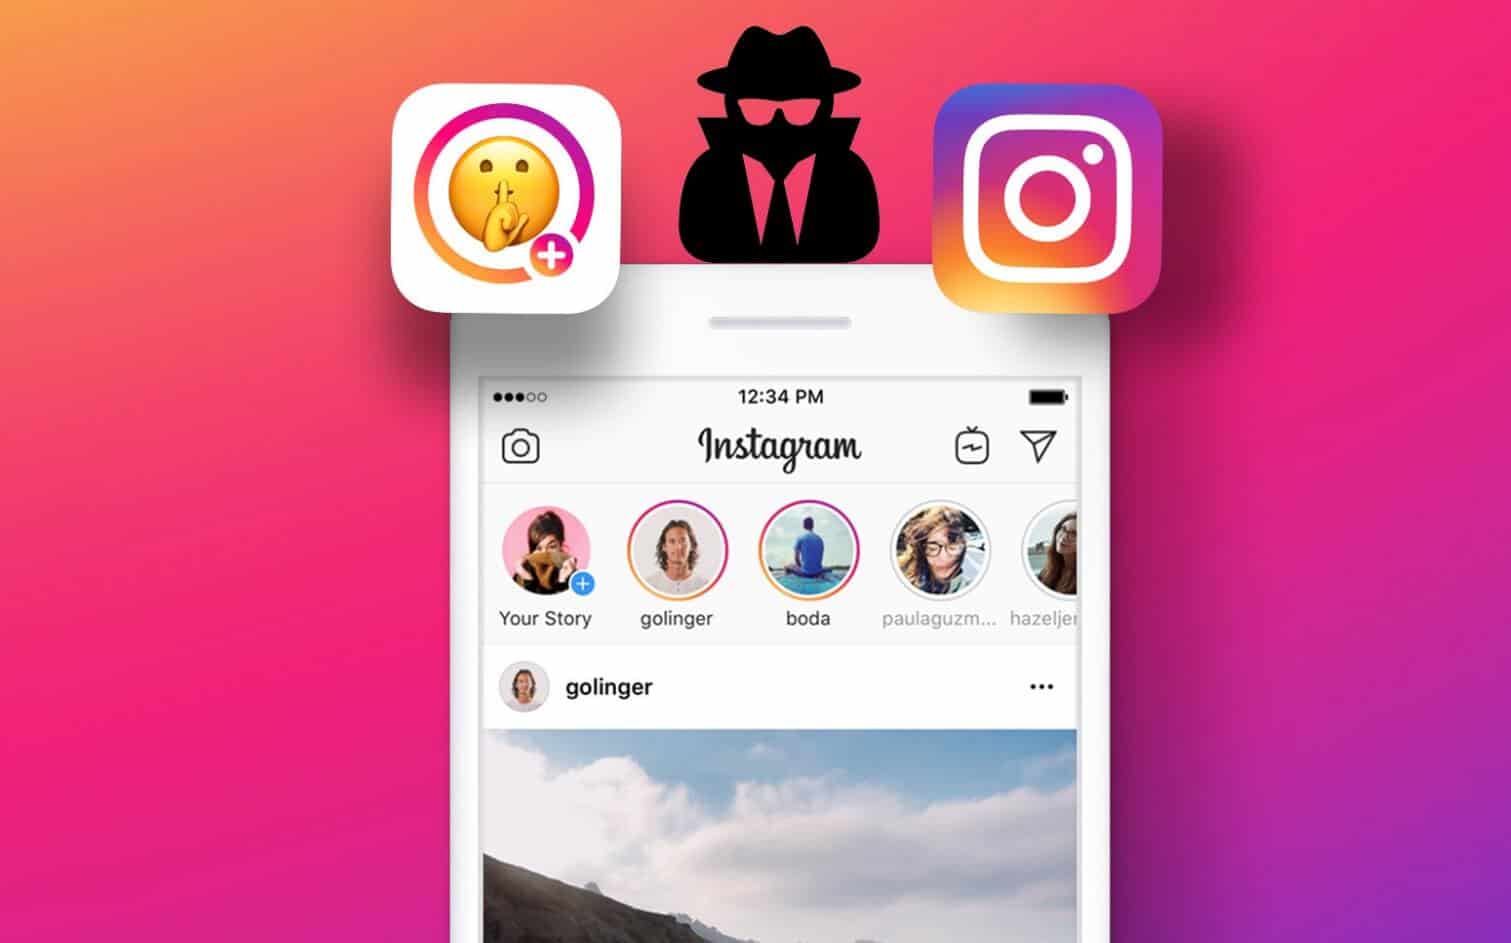 How to View Instagram Story Anonymously